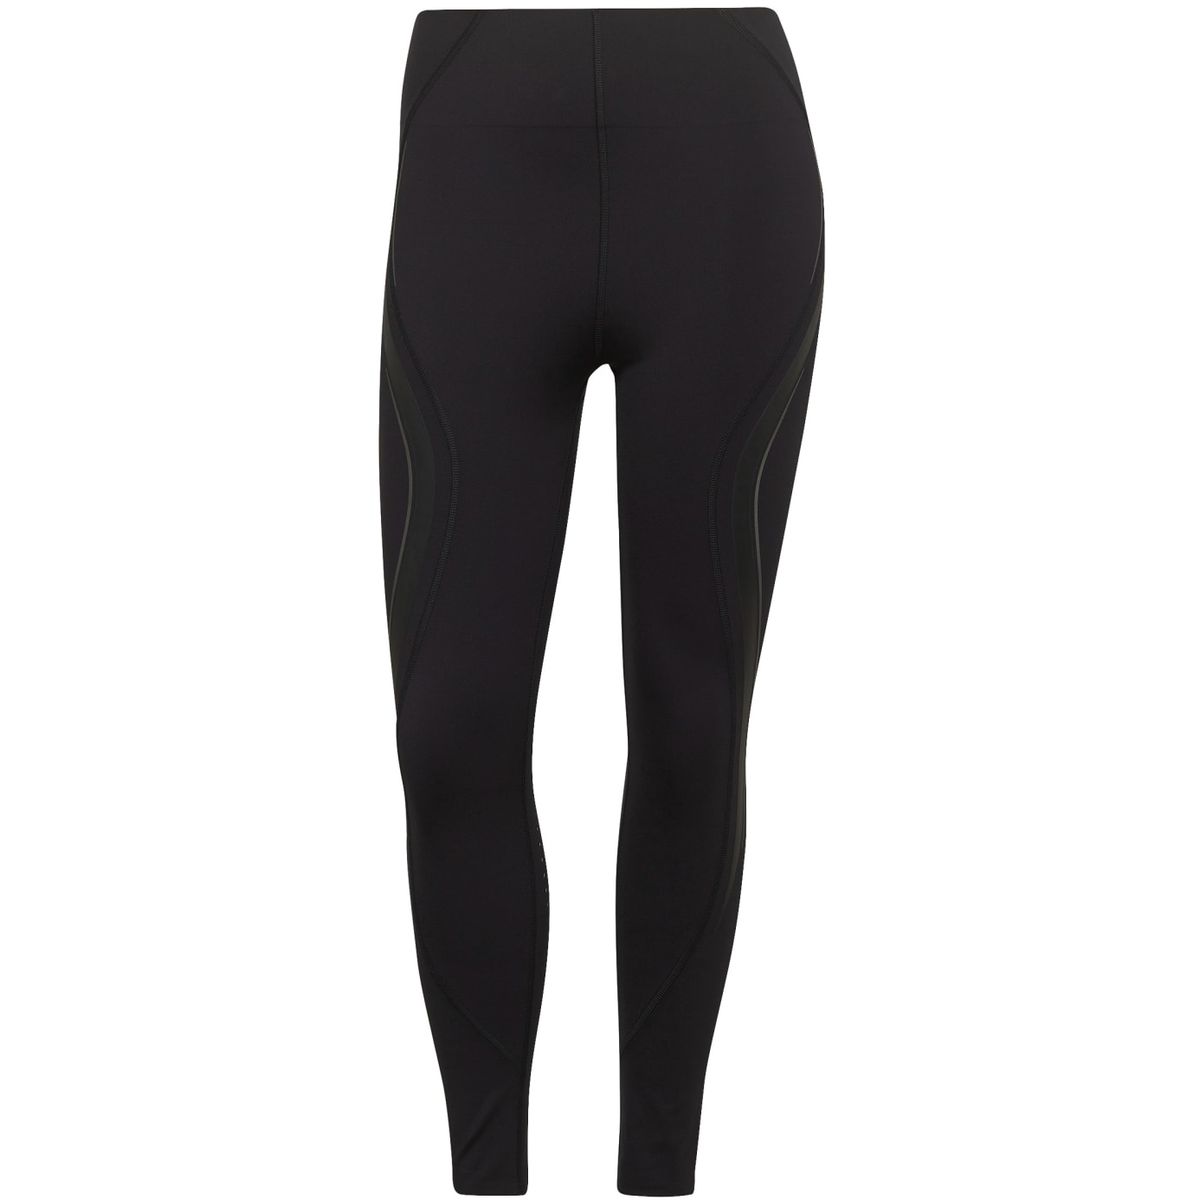 Adidas Tailored HIIT Luxe 45 seconds Training 7/8-Tight Damen